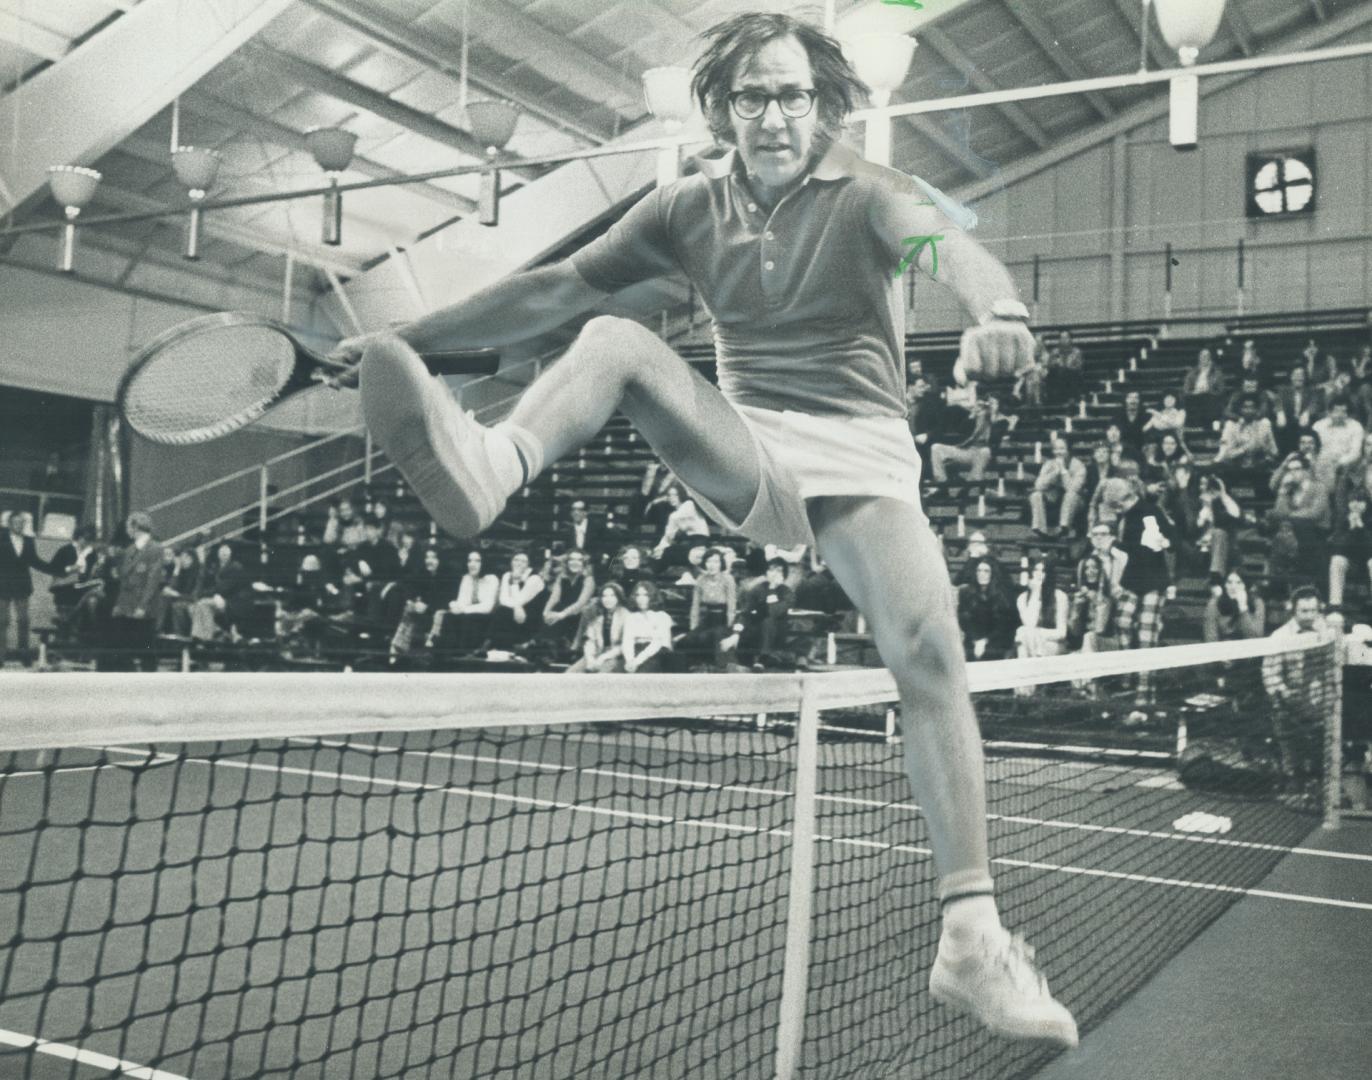 With a victory leap over the net, Bobby Riggs, the tennis star who calls himself the No